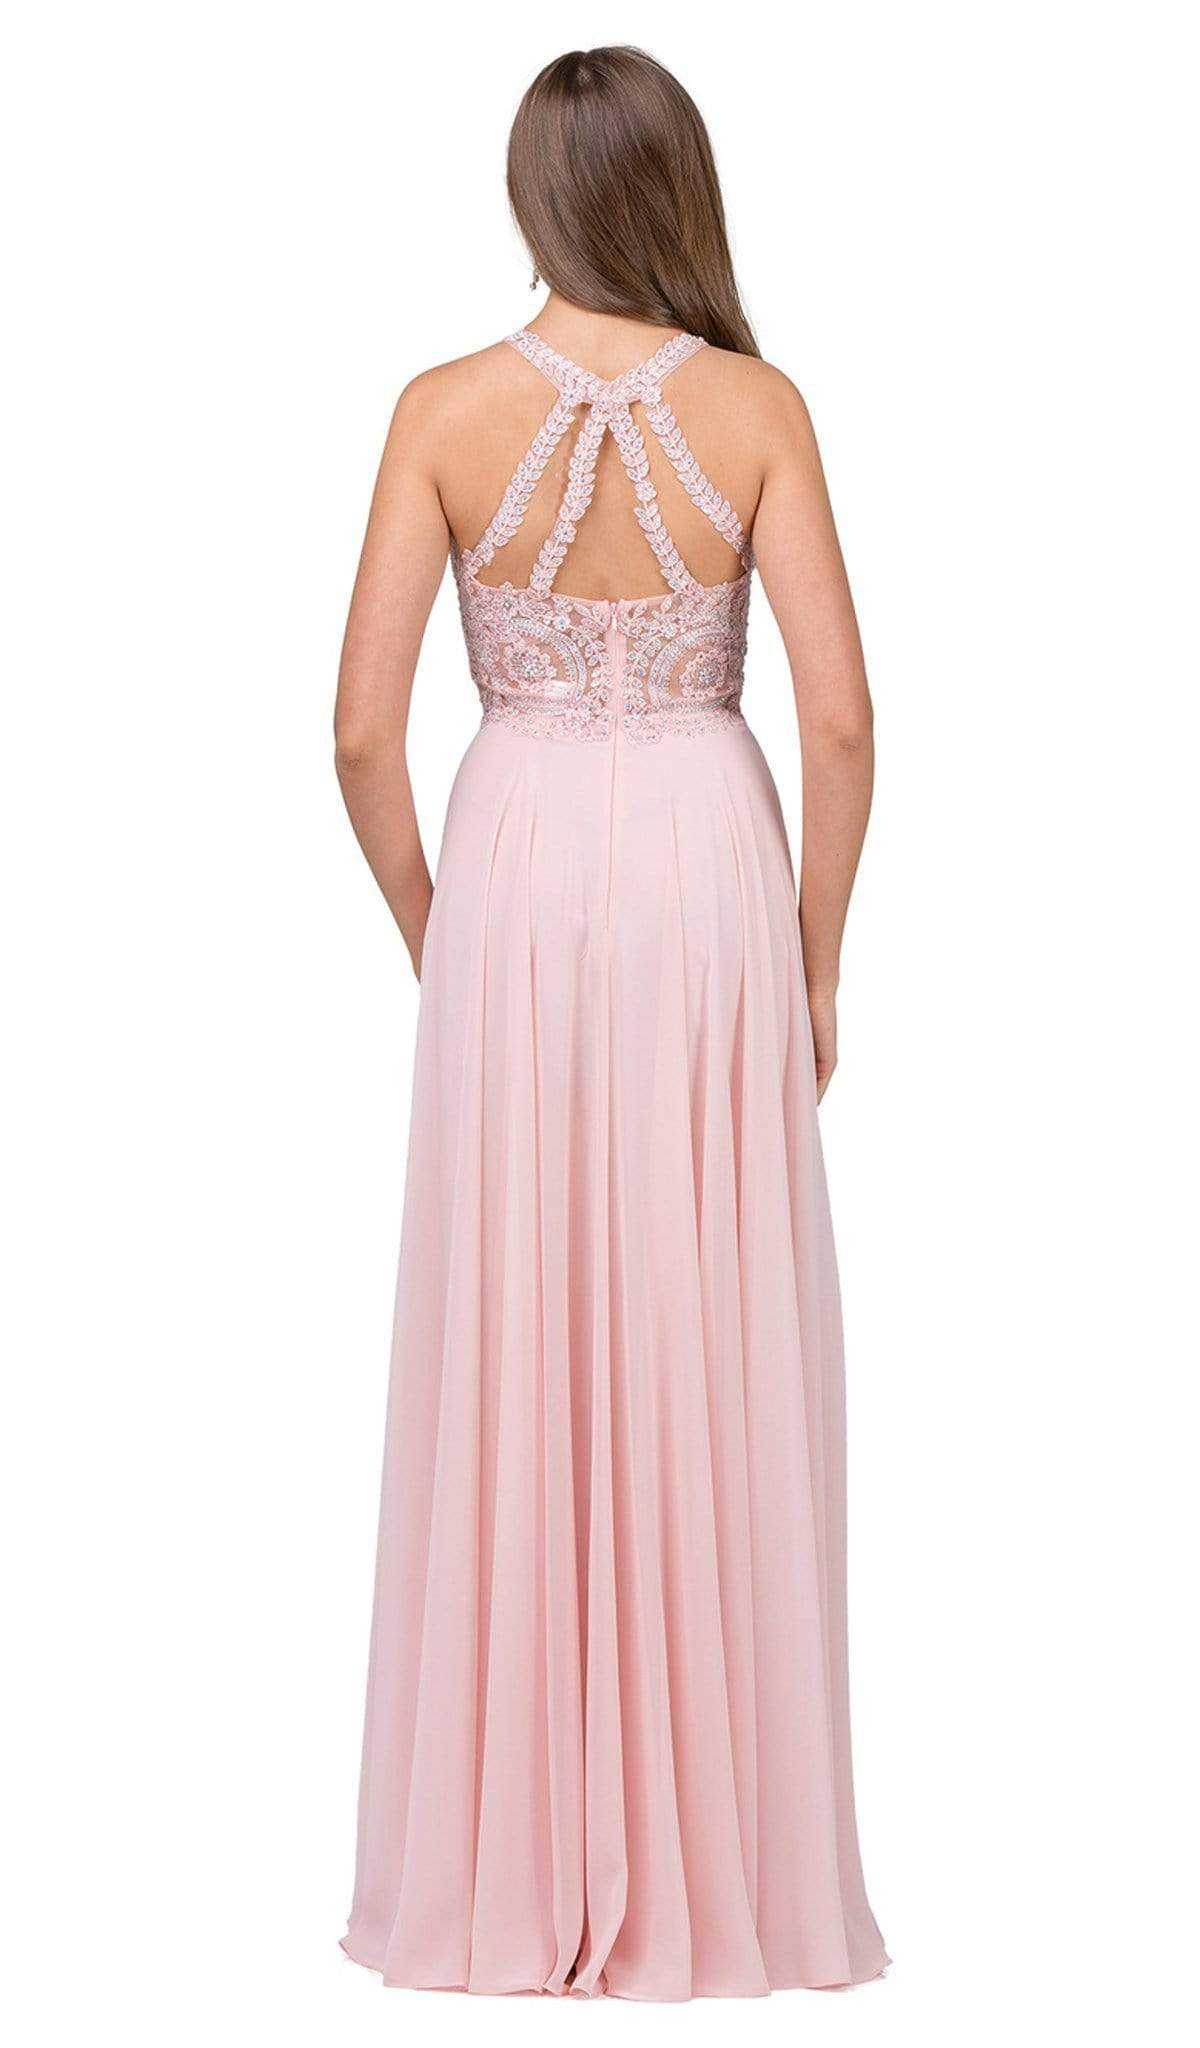 Dancing Queen, Dancing Queen - 2234 Sleeveless Illusion Jewel Lace Ornate Prom Gown